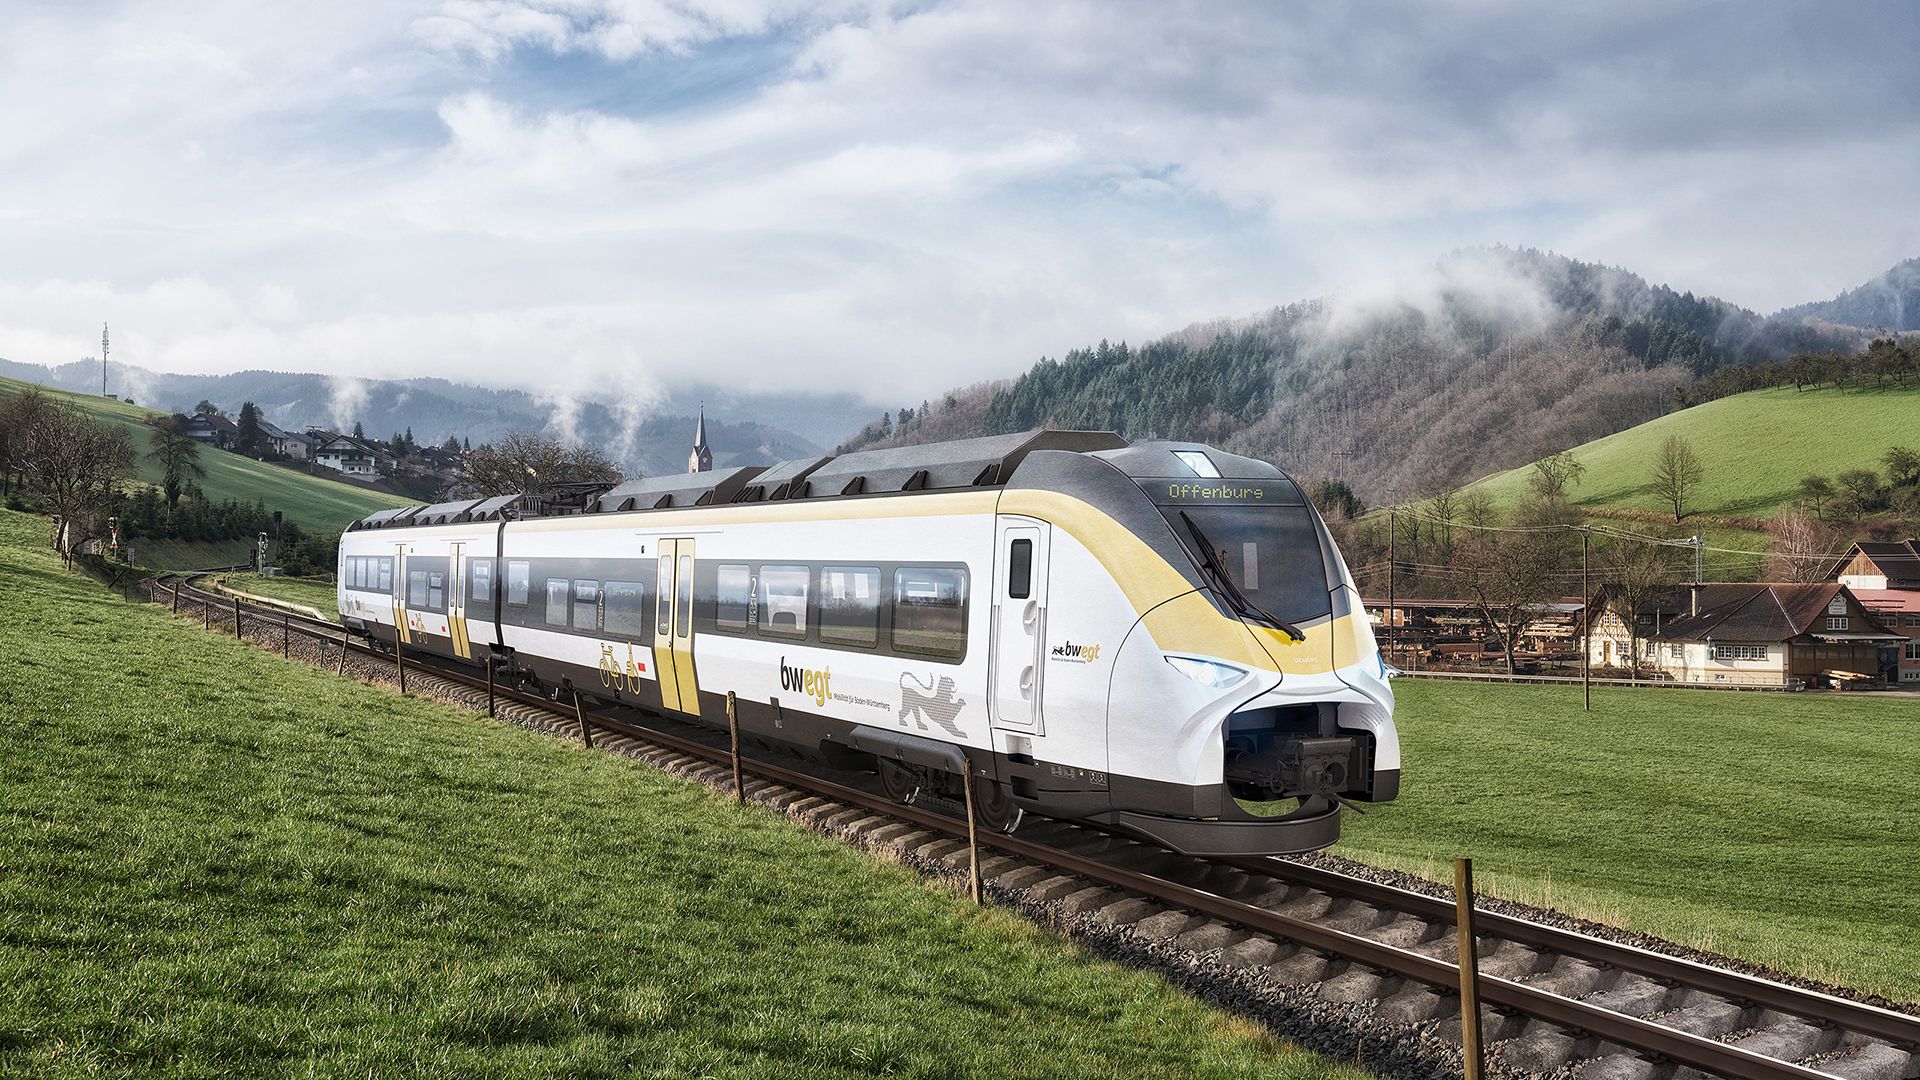 Slechthorend Entertainment Perforatie Mireo Plus B – A pioneering step into the future - Mireo | Commuter and  Regional Trains | Siemens Mobility - Global